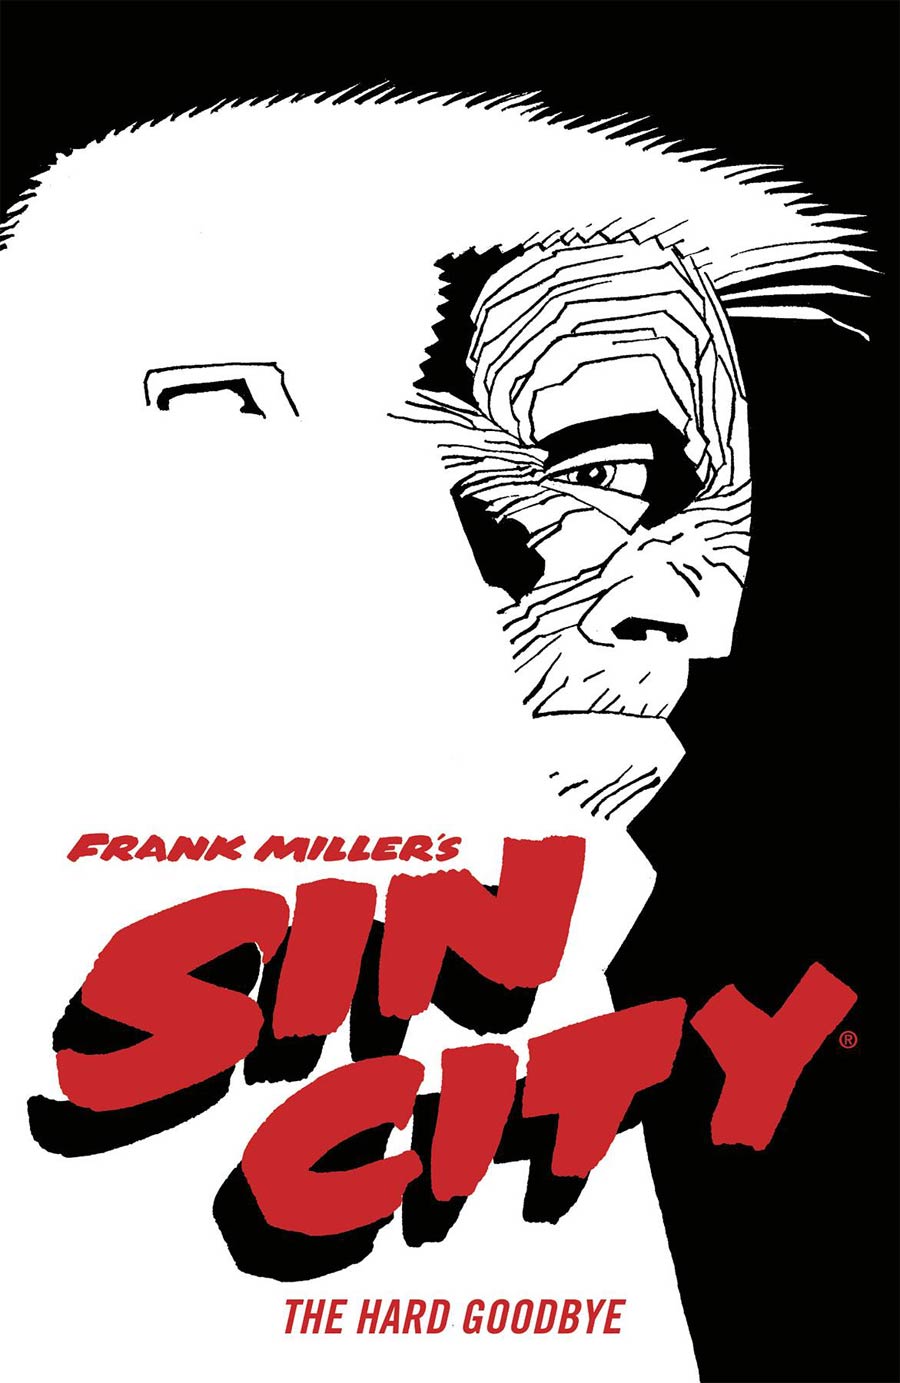 Frank Millers Sin City Vol 1 Hard Goodbye Deluxe HC 4th Edition